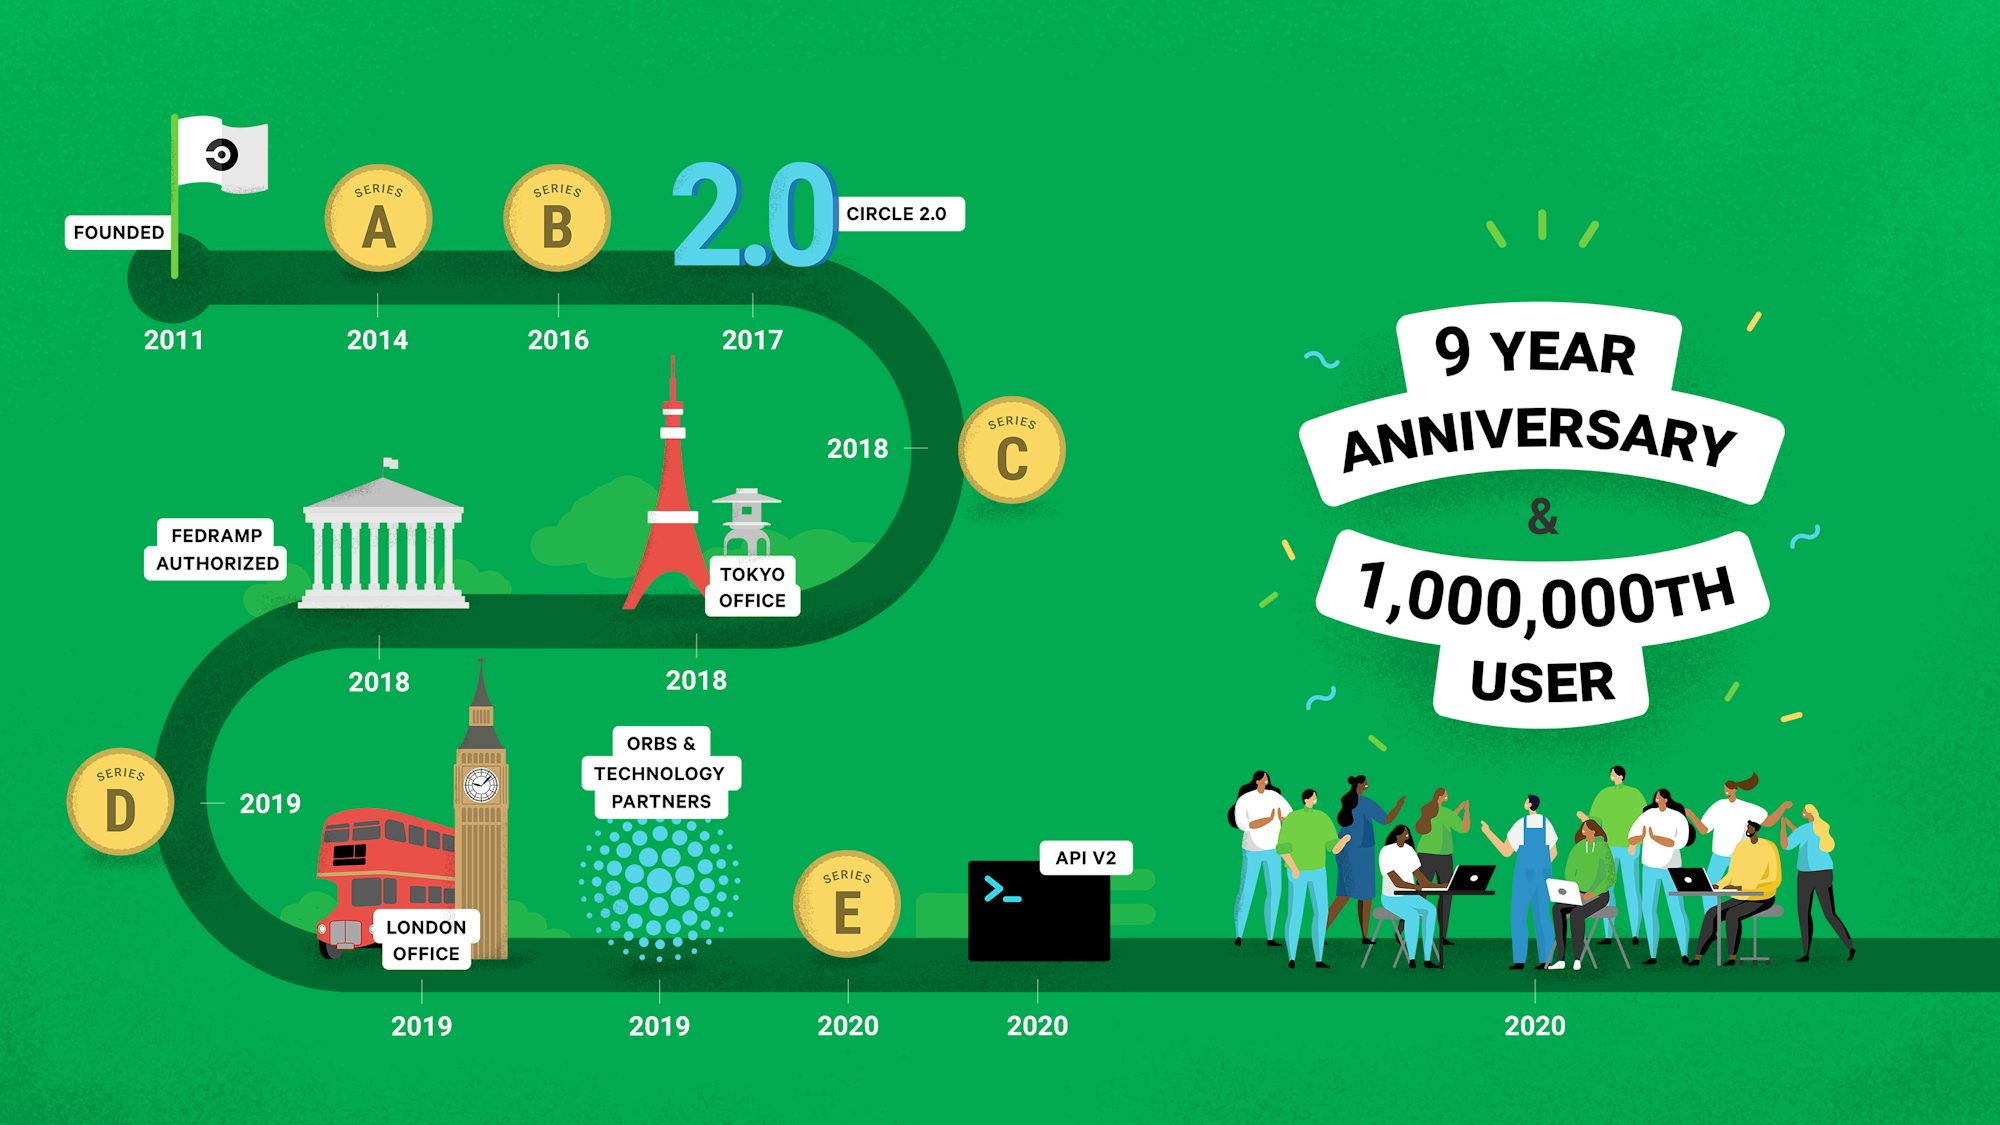 CircleCI celebrates nine years of service and 1 million developers on our platform